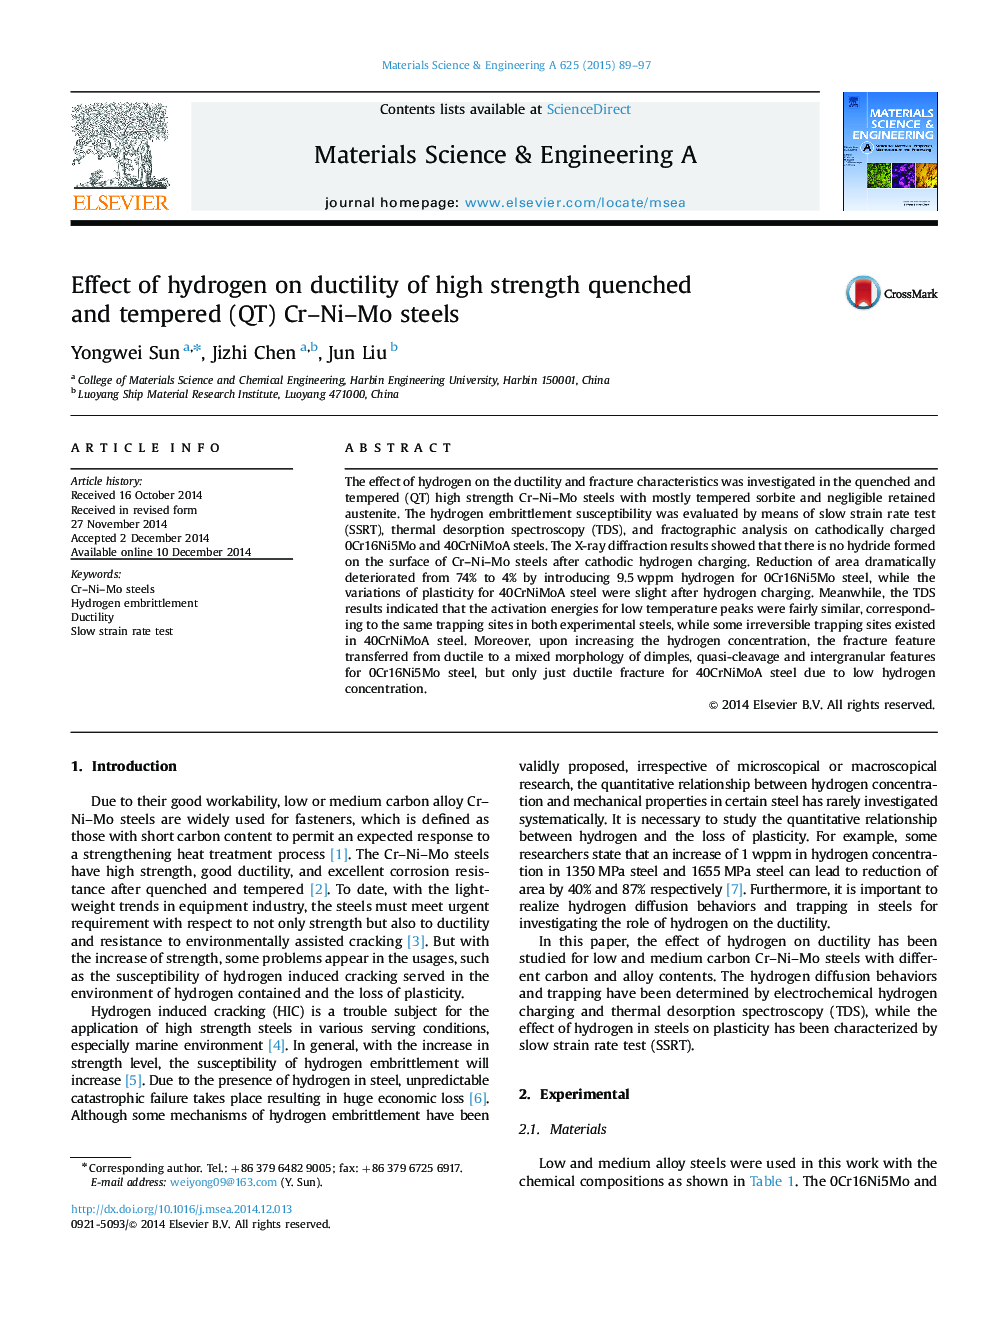 Effect of hydrogen on ductility of high strength quenched and tempered (QT) Cr-Ni-Mo steels